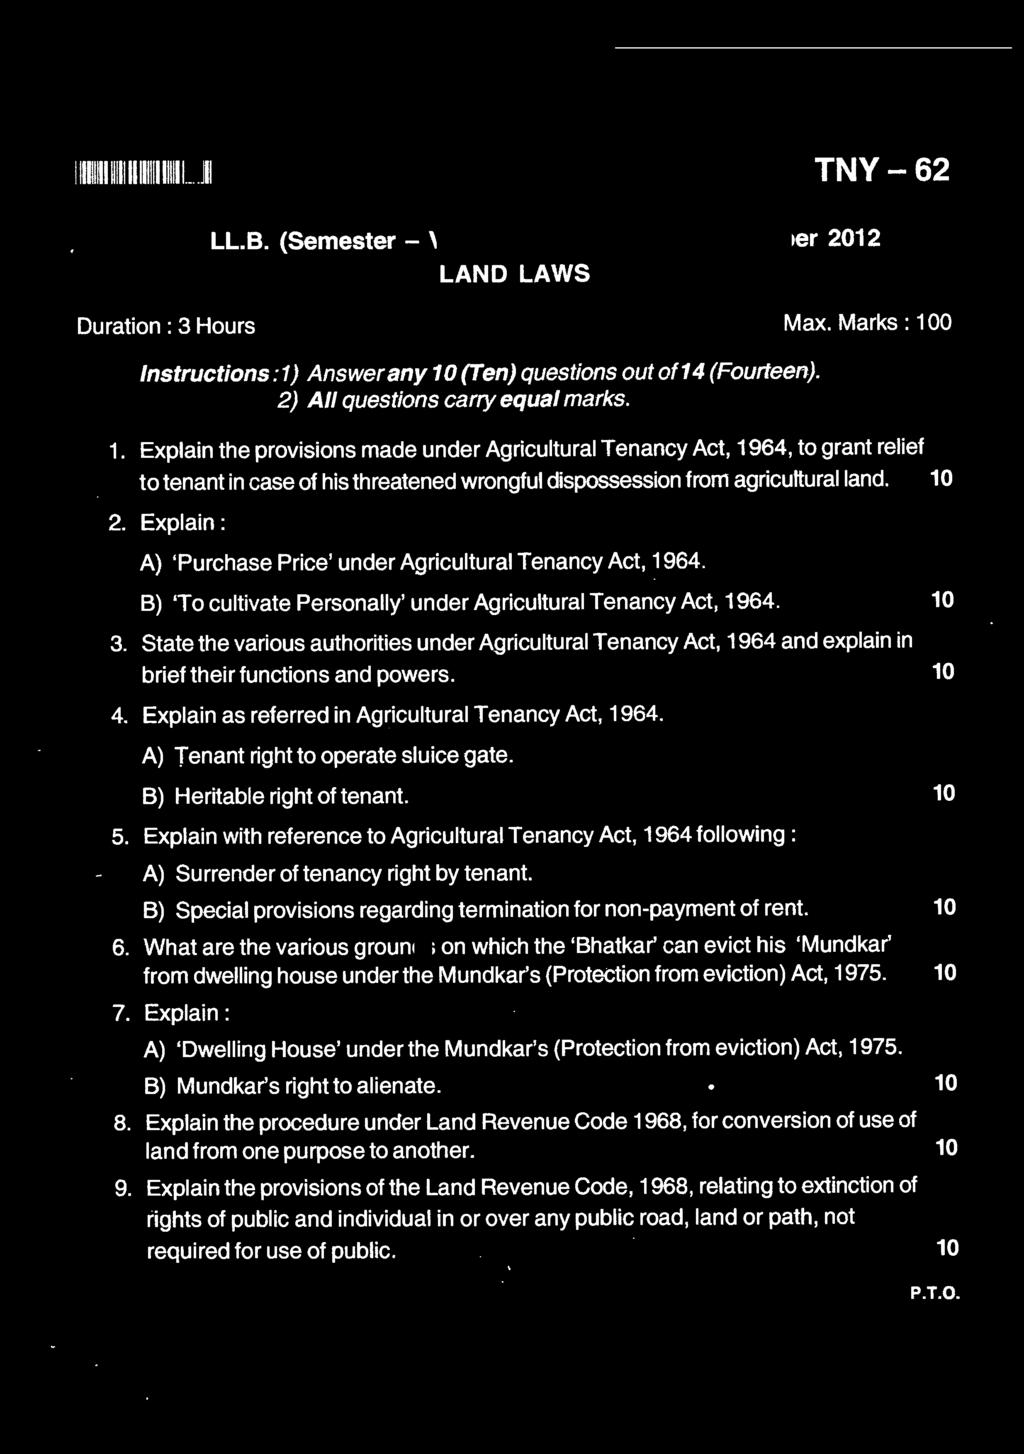 State the various authorities under Agricultural Tenancy Act, 1964 and explain in brief their functions and powers. 10 4. Explain as referred in Agricultural Tenancy Act, 1964.